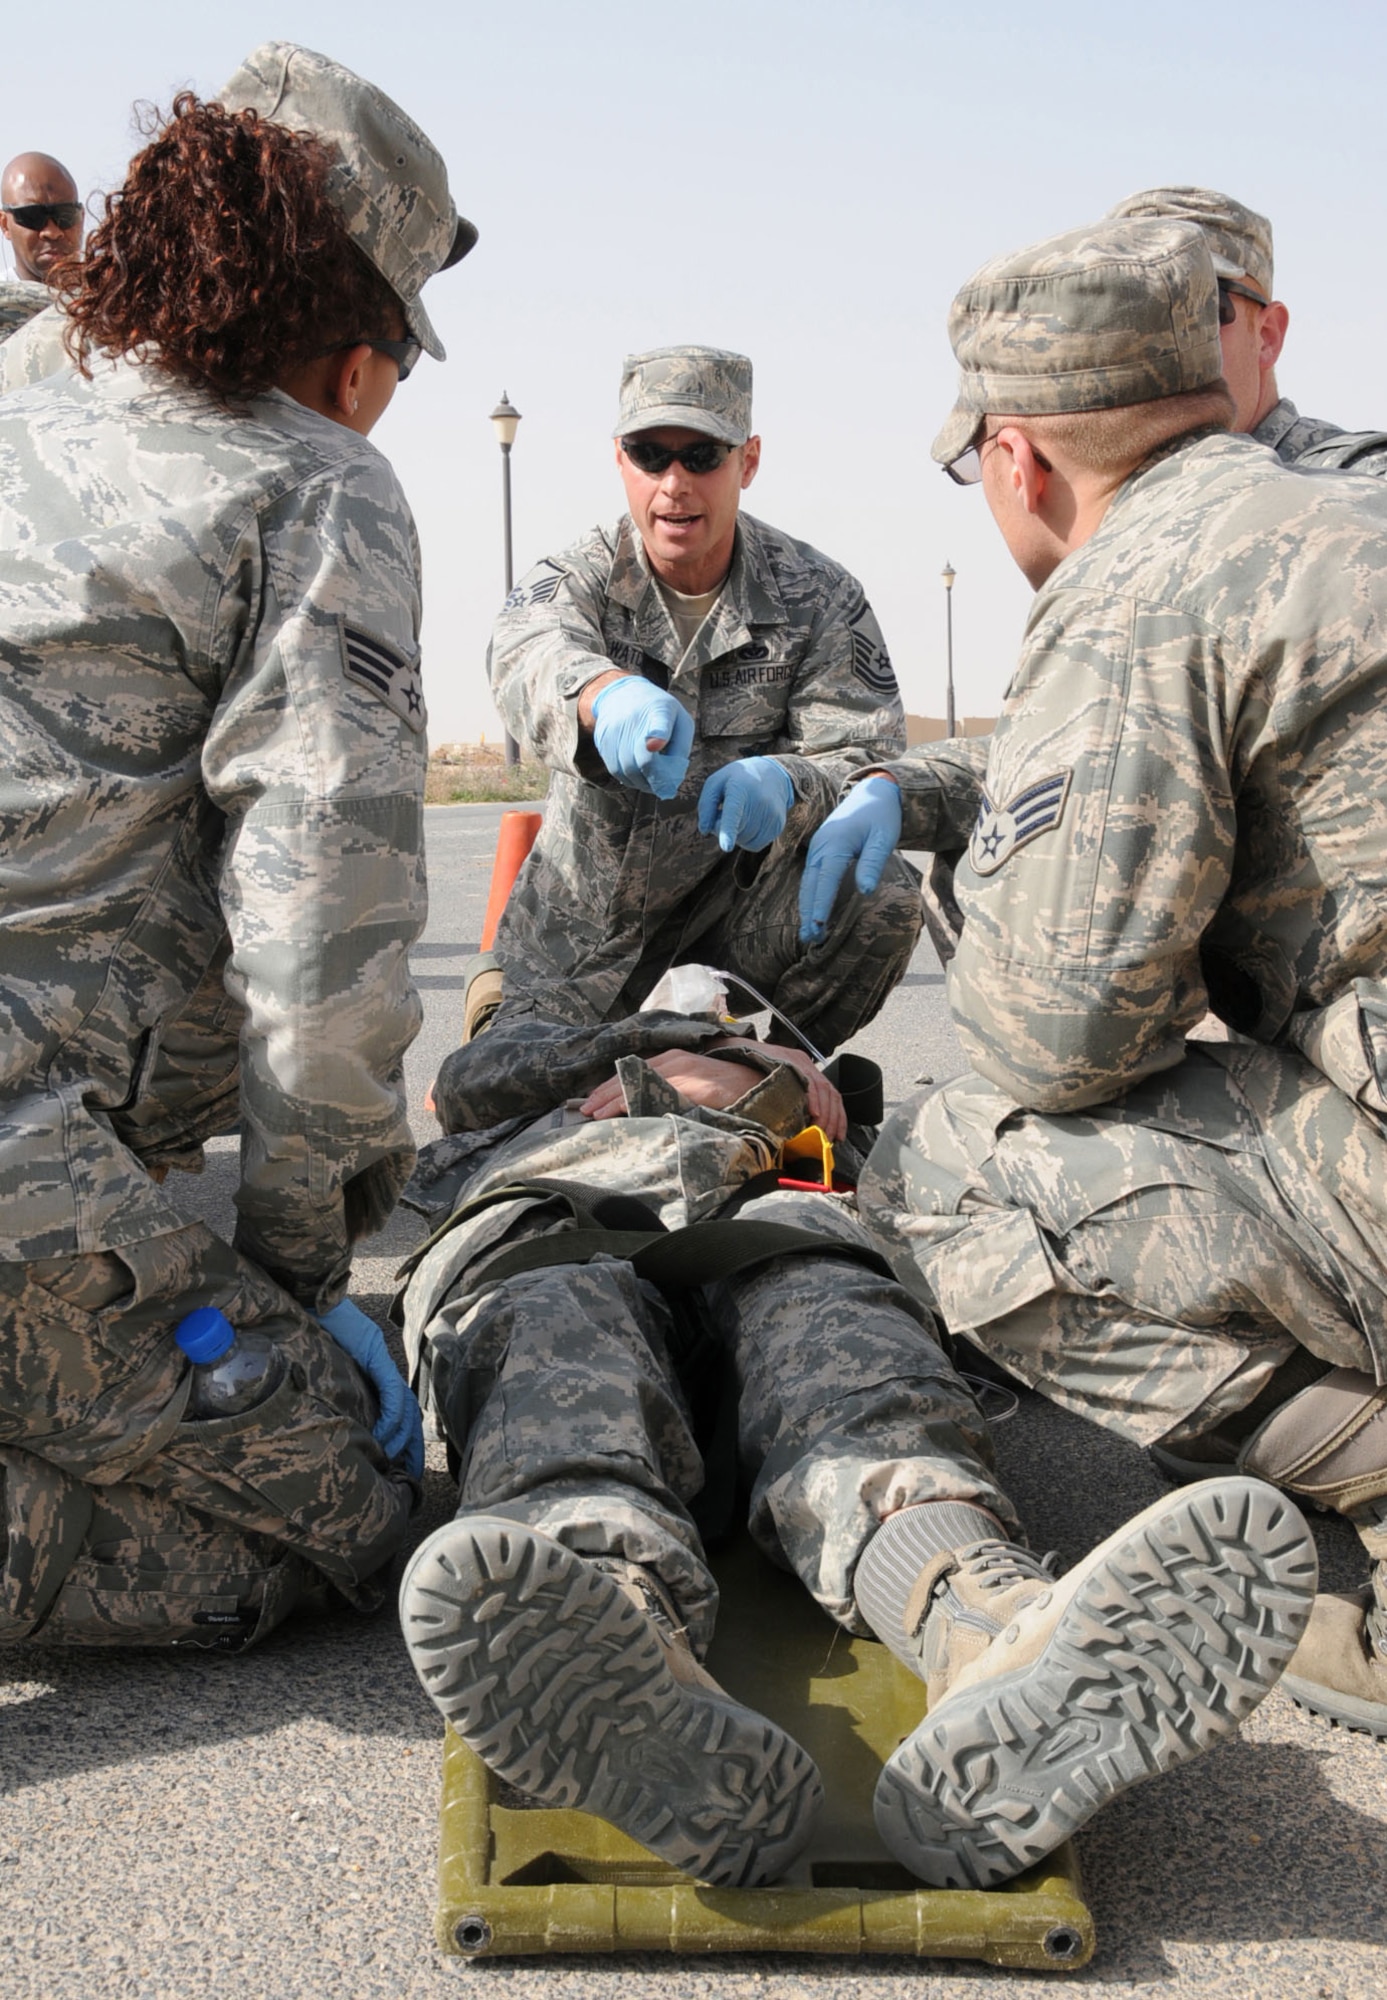 U.S. Air Force Master Sgt. Mark Watczak, 386th Expeditionary Civil Engineering Squadron Fire Department, directs his team during an EMT Rodeo hosted by the 386th Expeditionary Medical Group in an undisclosed location, Southwest Asia, Feb. 18, 2012.  Watczak, native to Houlton, Wis., deployed from the 148th Civil Engineering Squadron, Duluth, Minn., and his emergency medical technician team participated in the competition to test their skills and knowledge in responding to different emergency situations alongside military and civilian EMT personnel from the Air Force, Army, and Navy. (U.S. Air Force photo by Staff Sgt. James Lieth/Released)